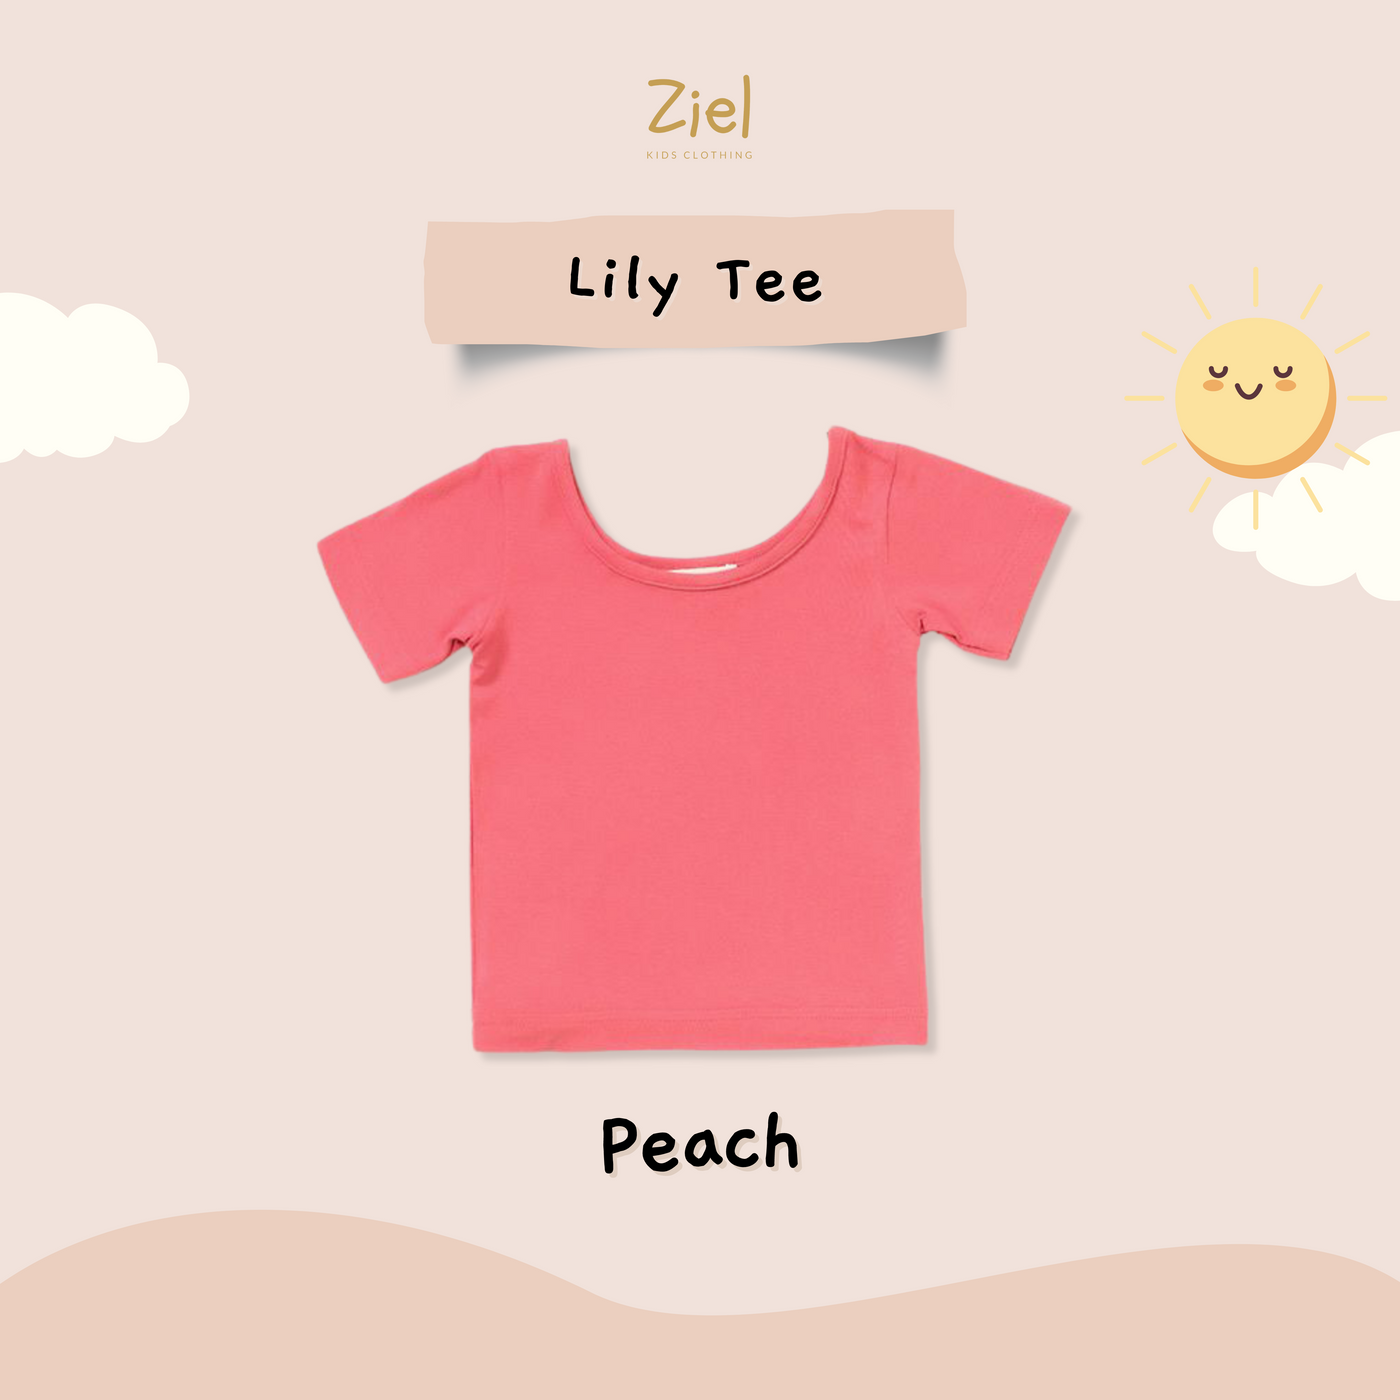 LILY TEE